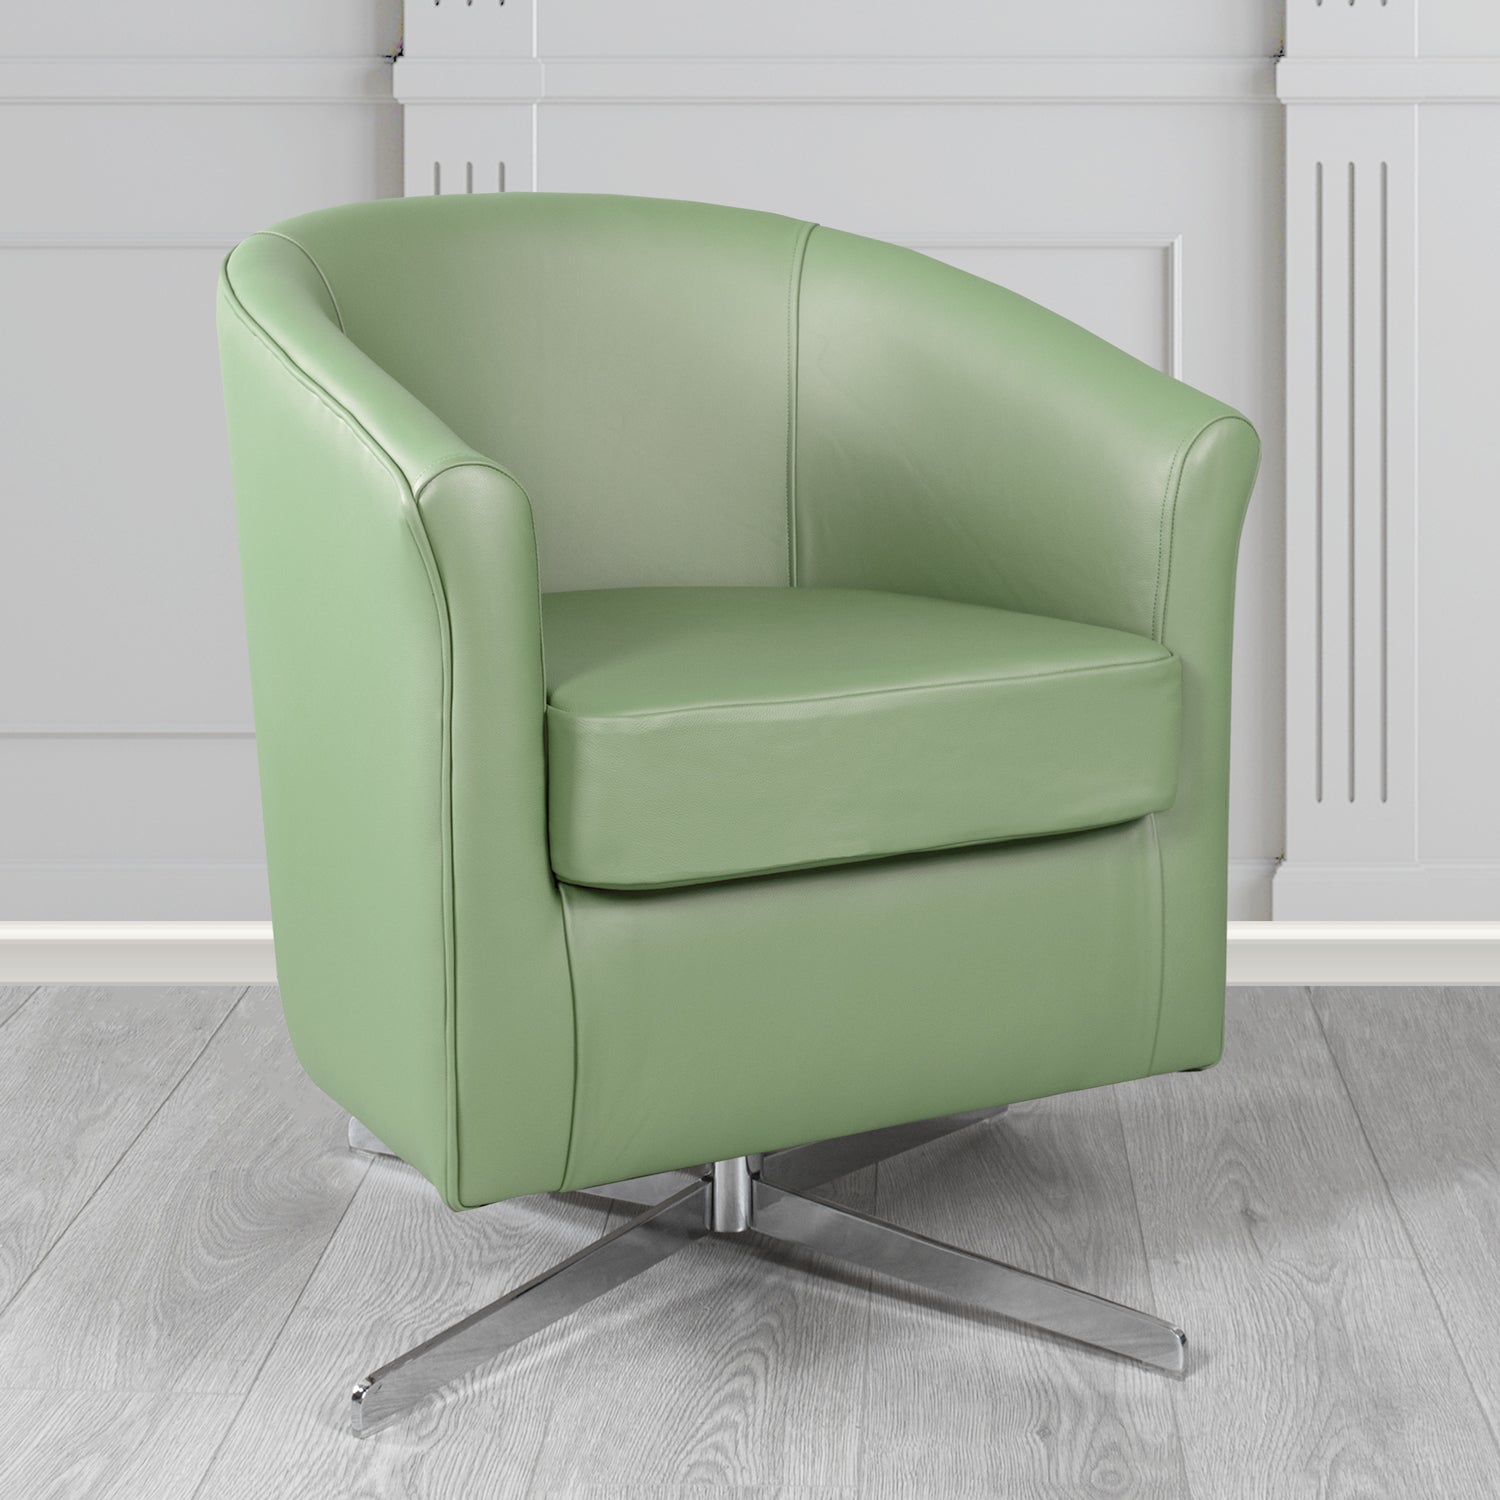 Cannes Swivel Tub Chair in Shelly Thyme Green Crib 5 Genuine Leather - The Tub Chair Shop